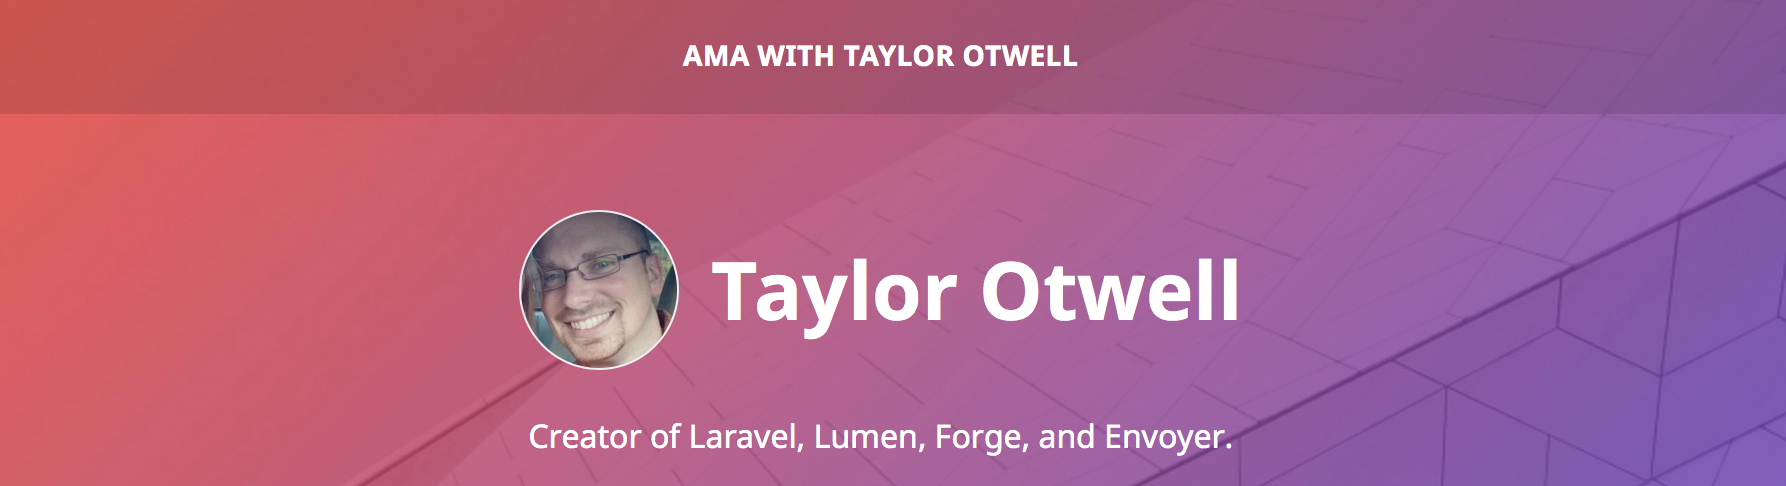 Live AMA with Taylor Otwell image